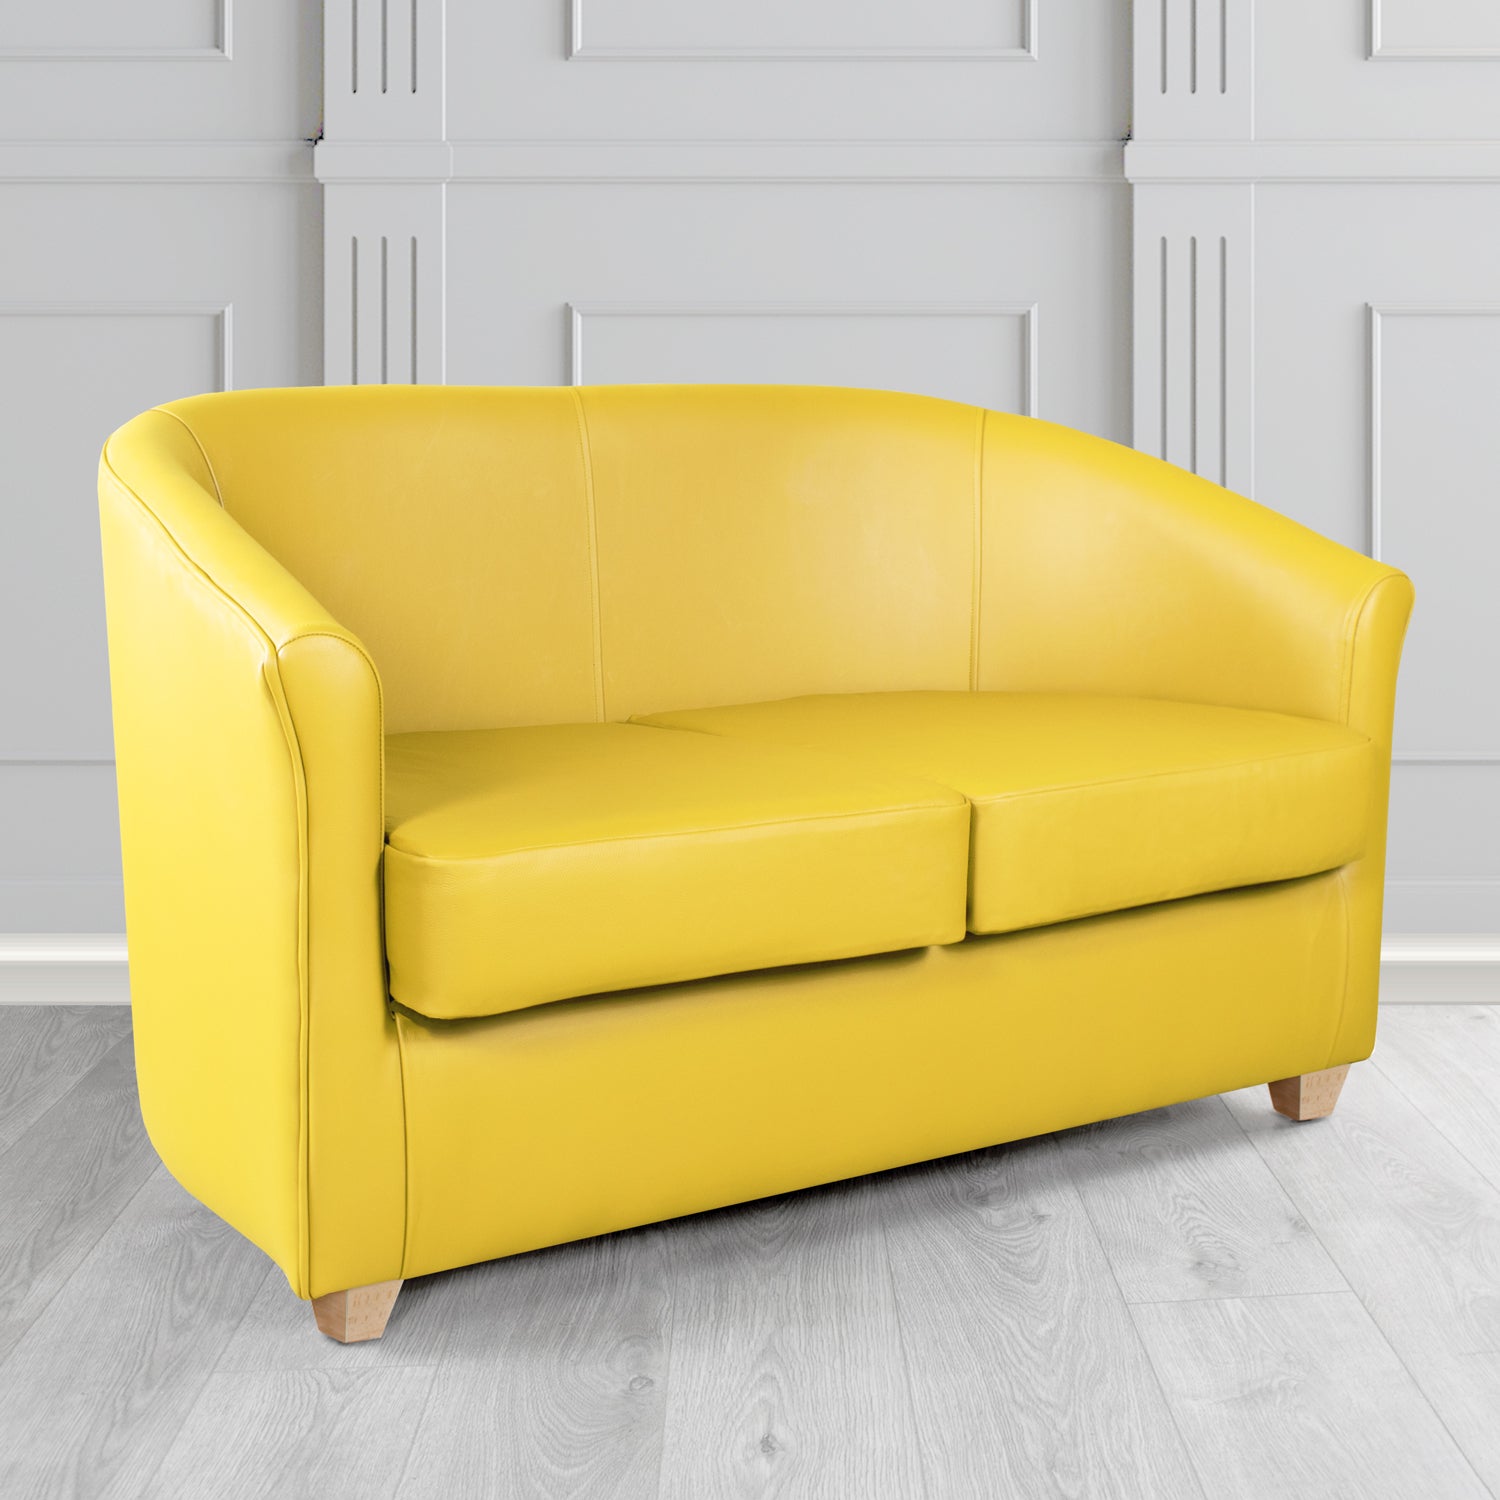 Cannes 2 Seater Tub Sofa in Just Colour Marigold Crib 5 Faux Leather - The Tub Chair Shop